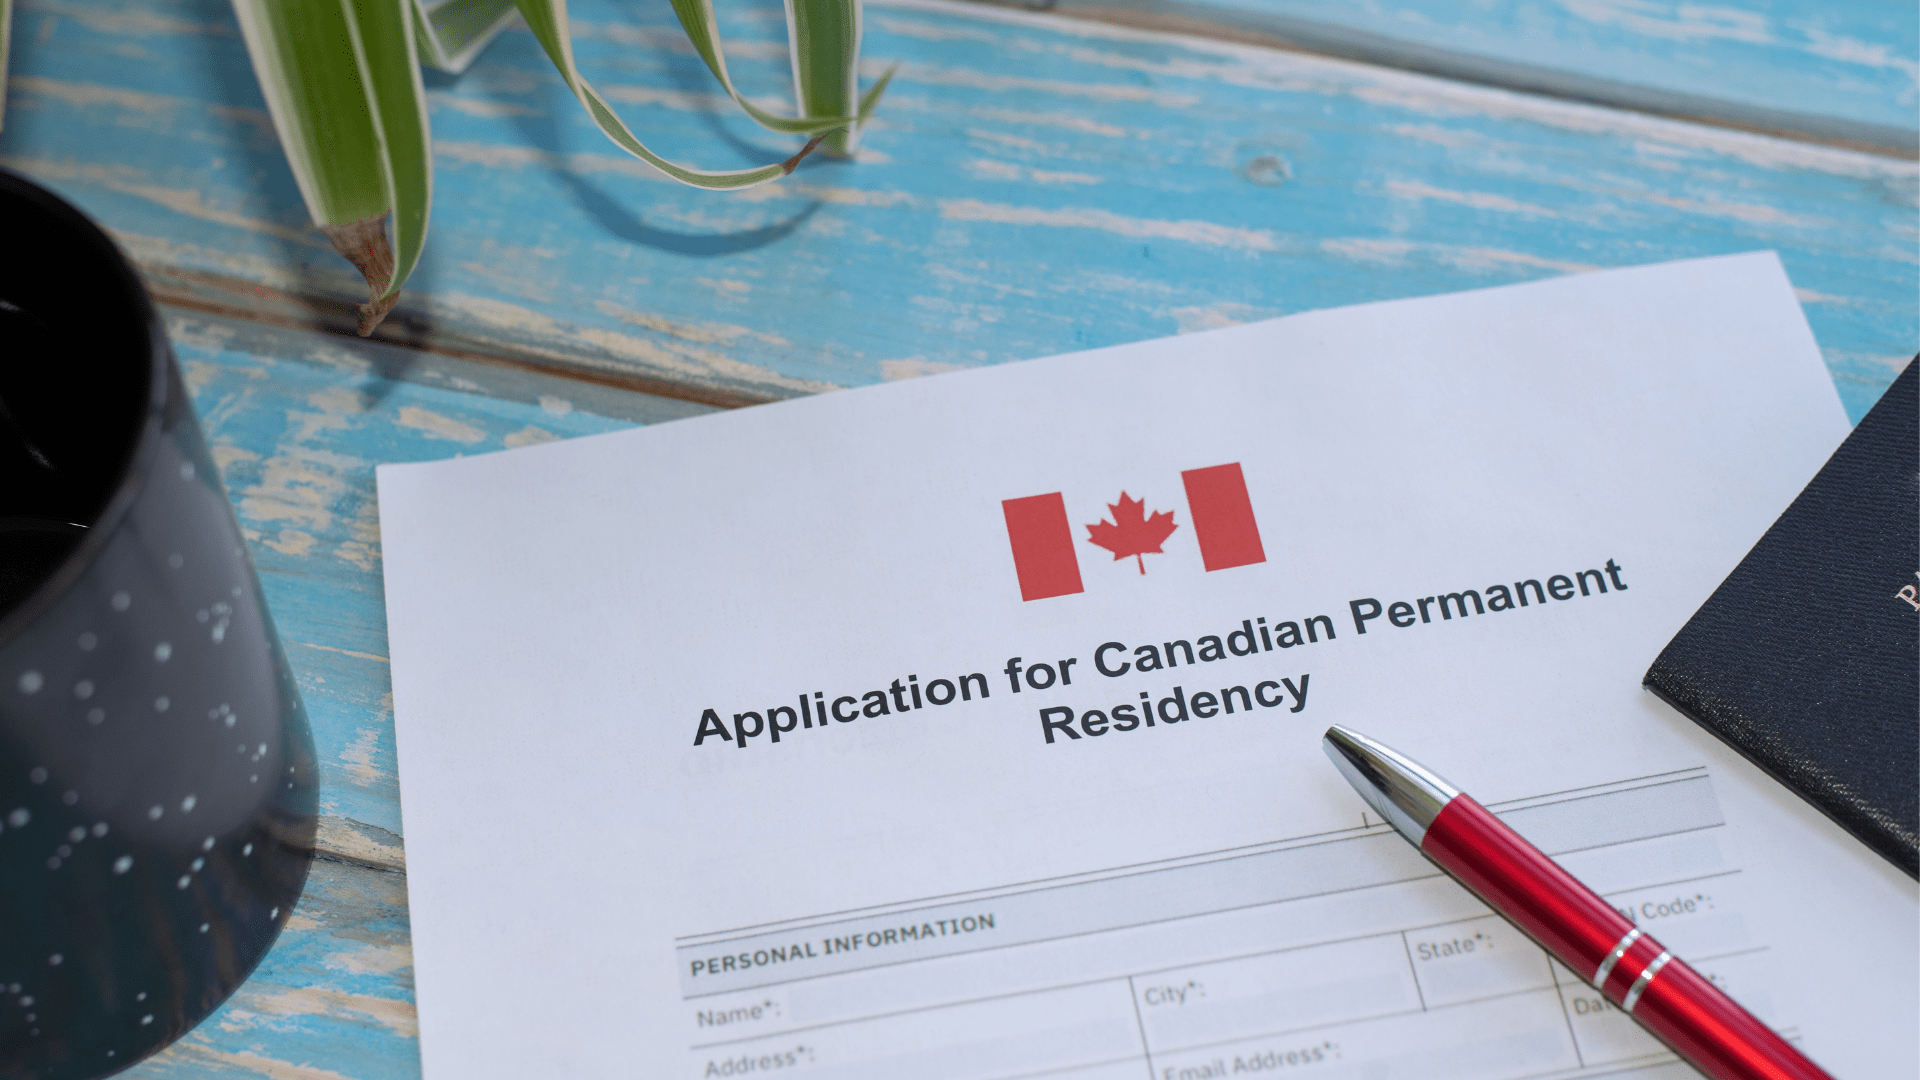 Permanent residence applications, refugees, healthcare workers, COVID-19, frontline workers, canada, immgration